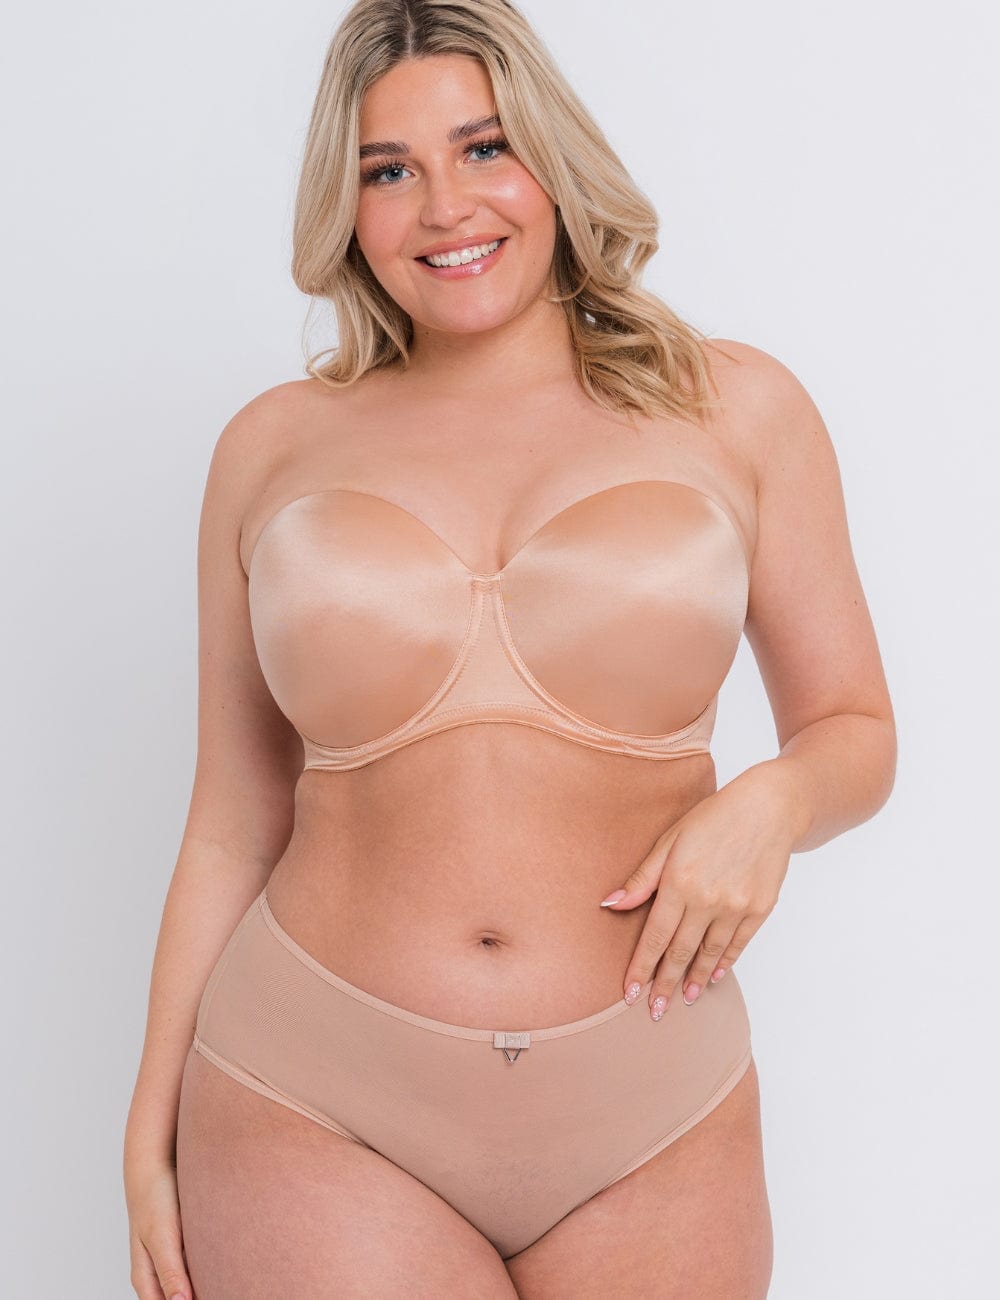 Strapless Bras Galore - Featuring Panache, Curvy Kate and Triumph!